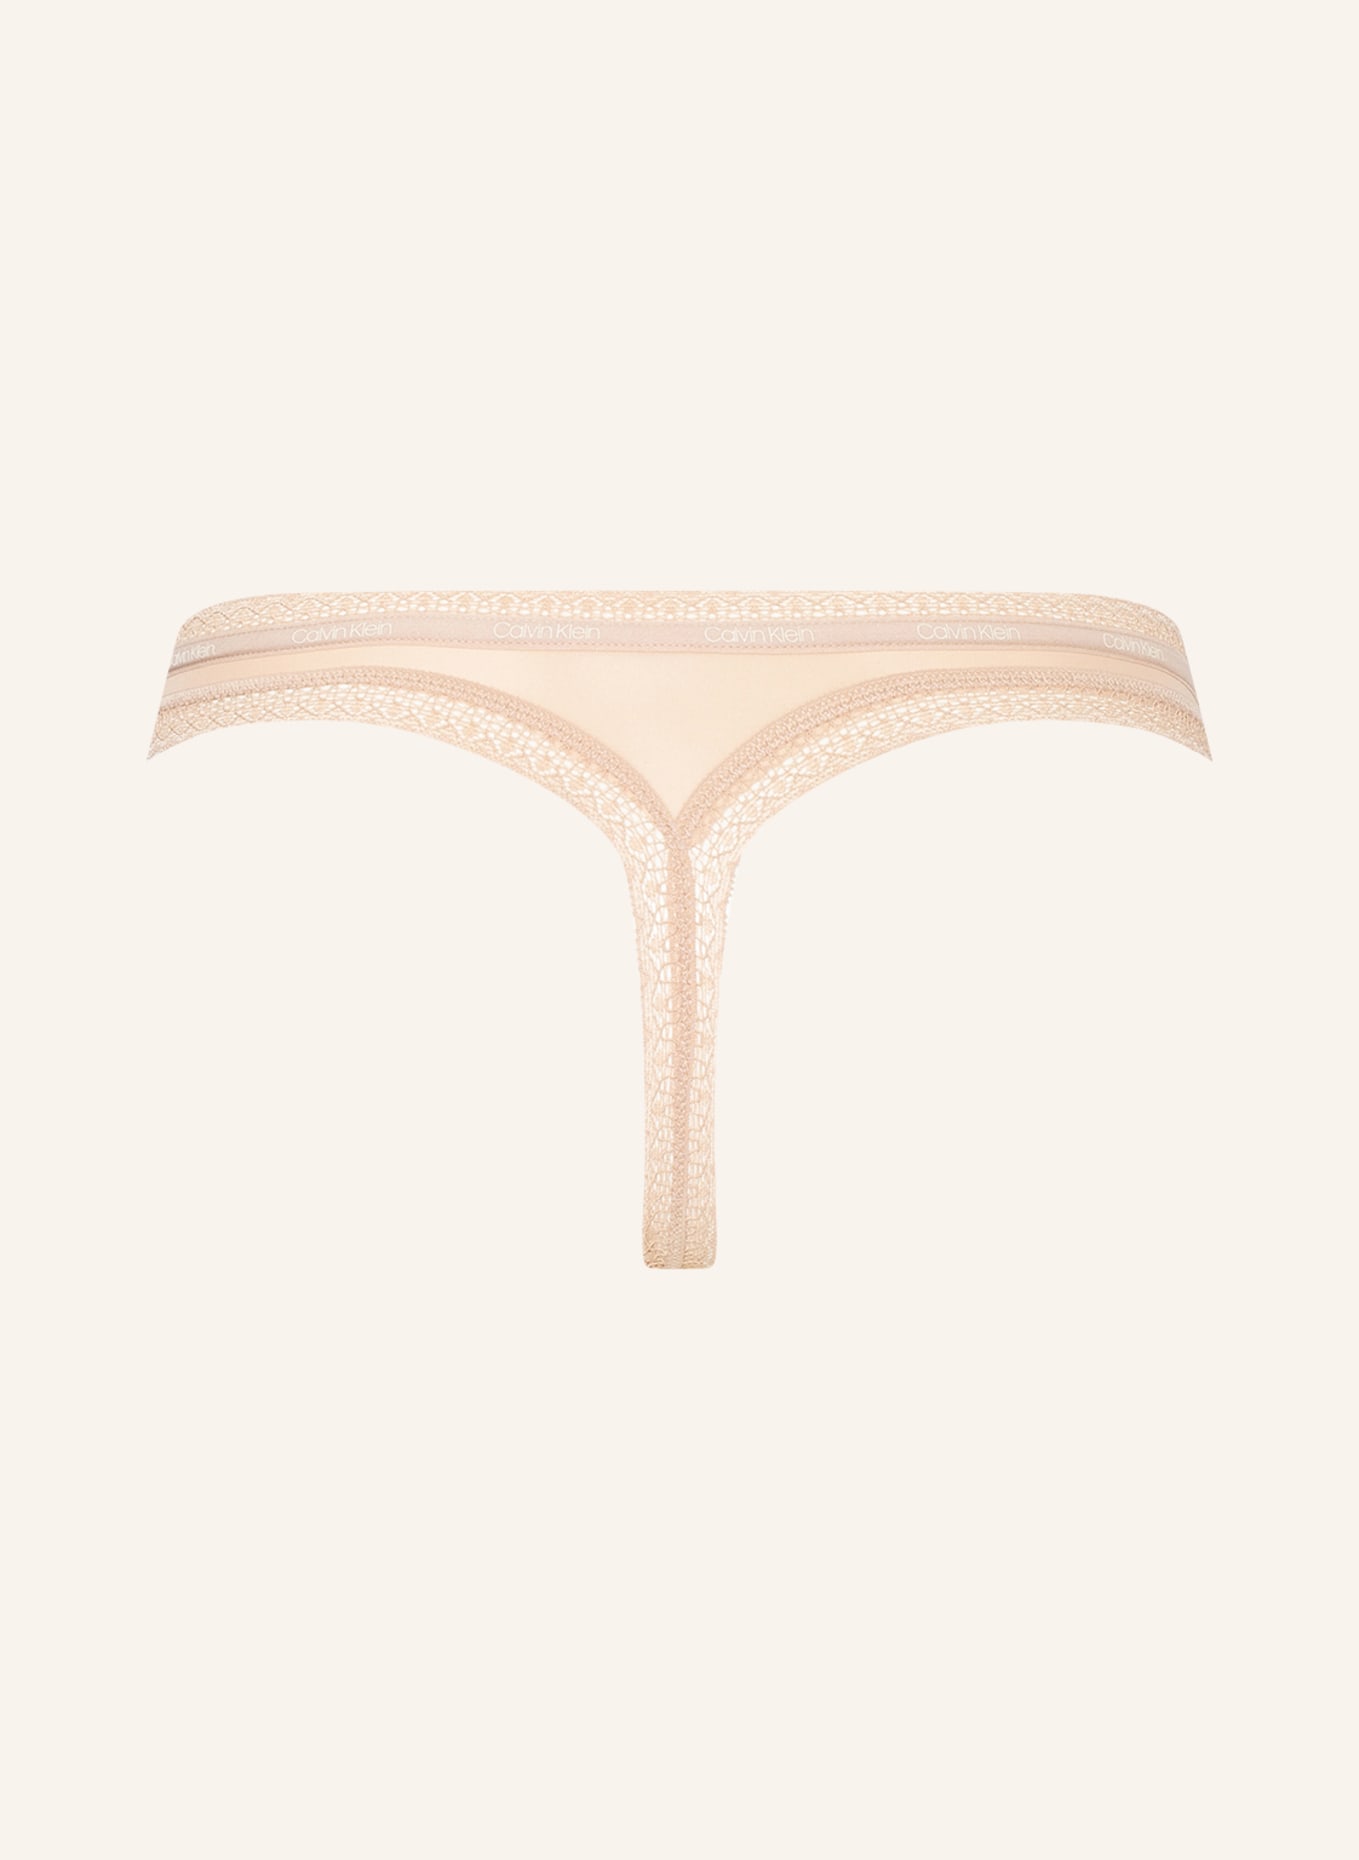 Calvin Klein 3-pack thongs BOTTOMS UP in white/ nude/ black